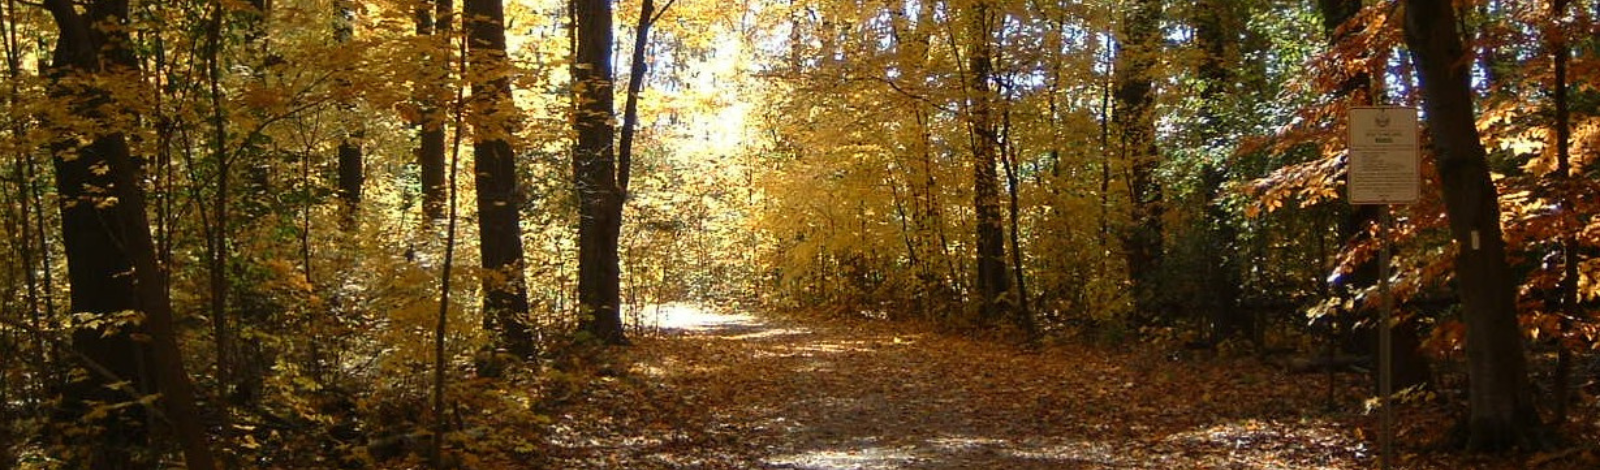 Image of a trail in the fall with yellow and orange leaves on the trees